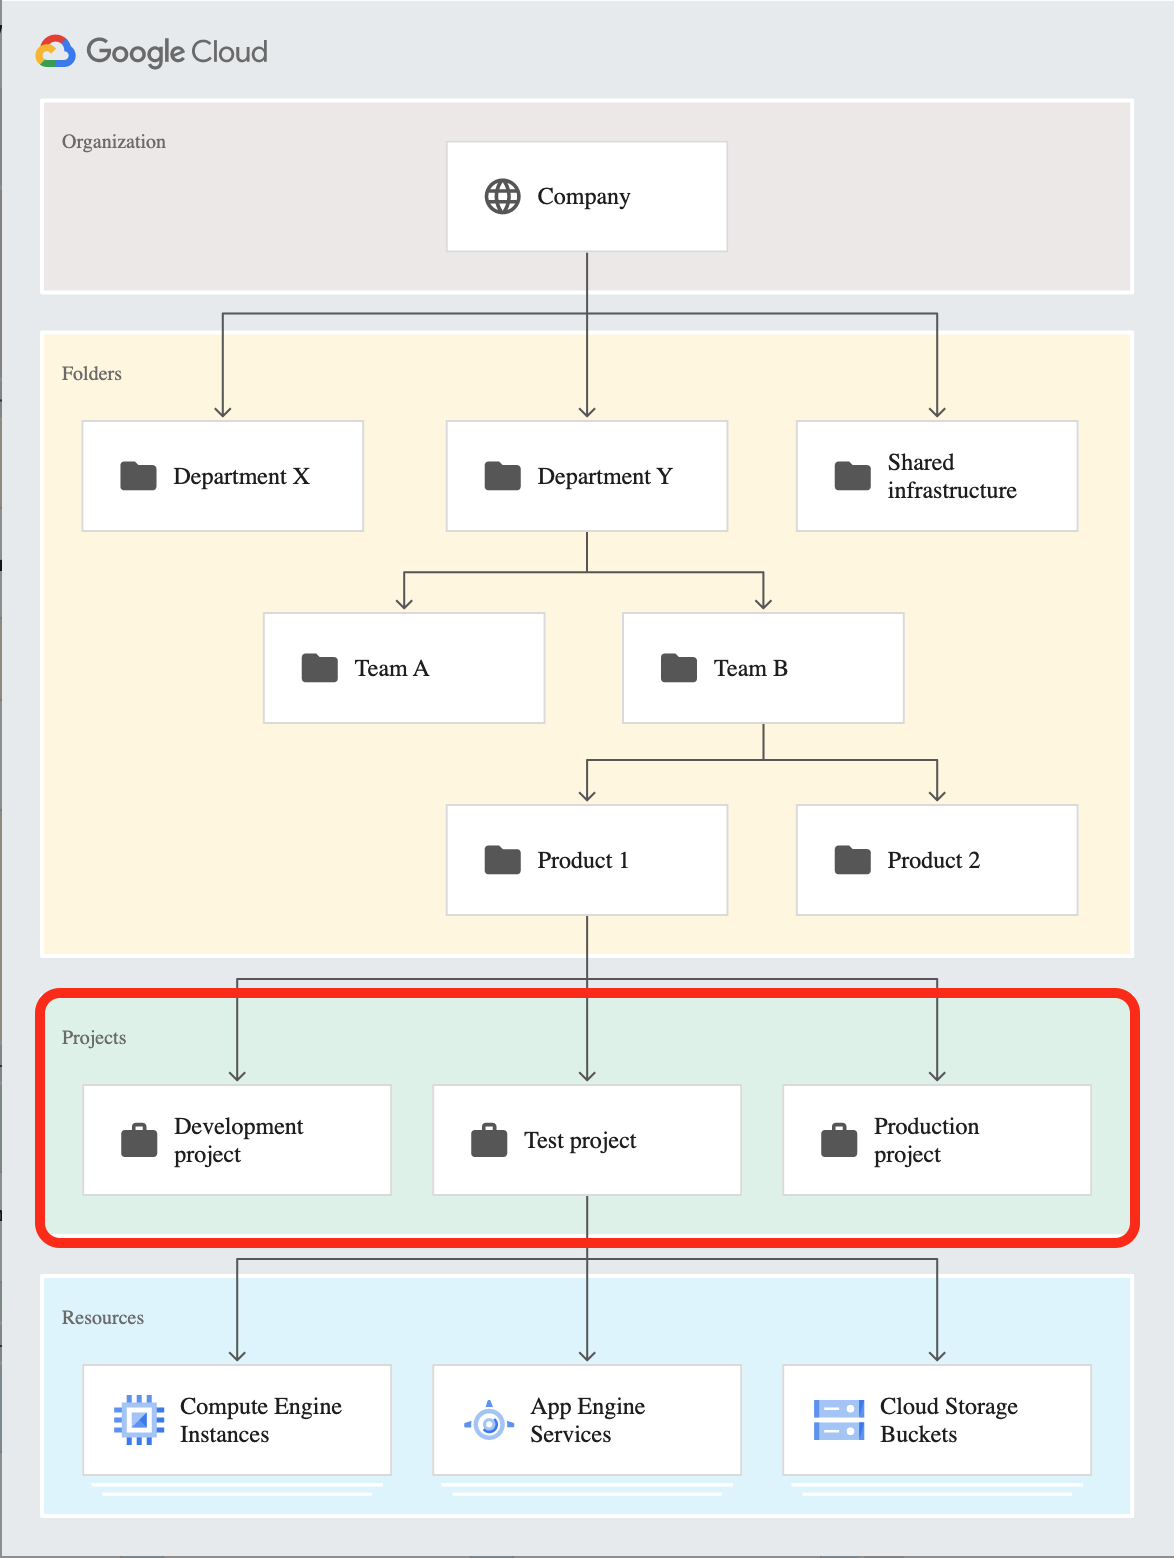 Google Cloud Hierarchy - Projects